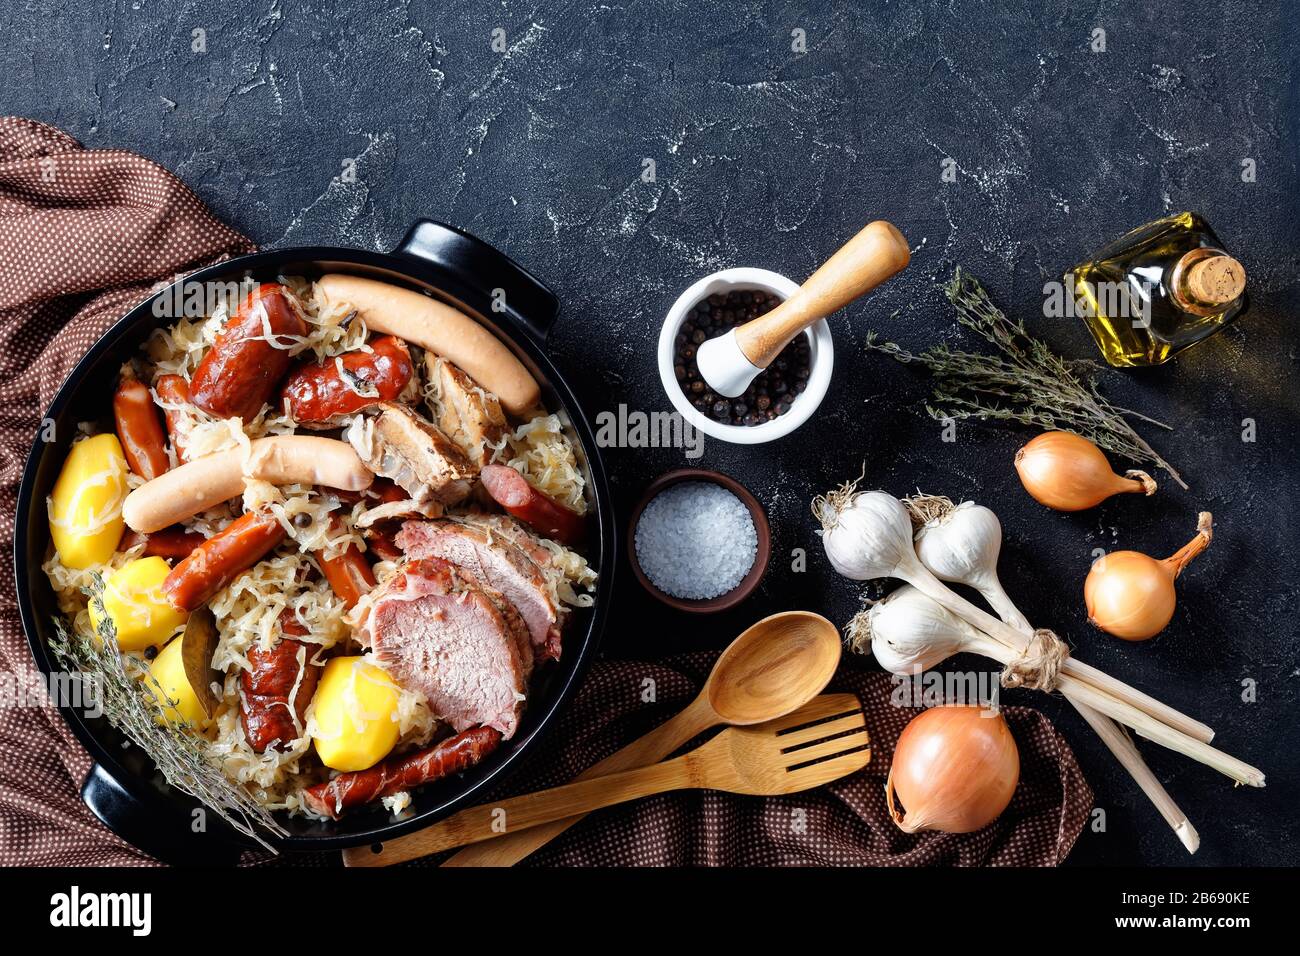 Choucroute garnie traditional french cuisine dish of sauer cabbage with smoked bacon, pork loin, sausages stewed in white wine with onion and garlic o Stock Photo